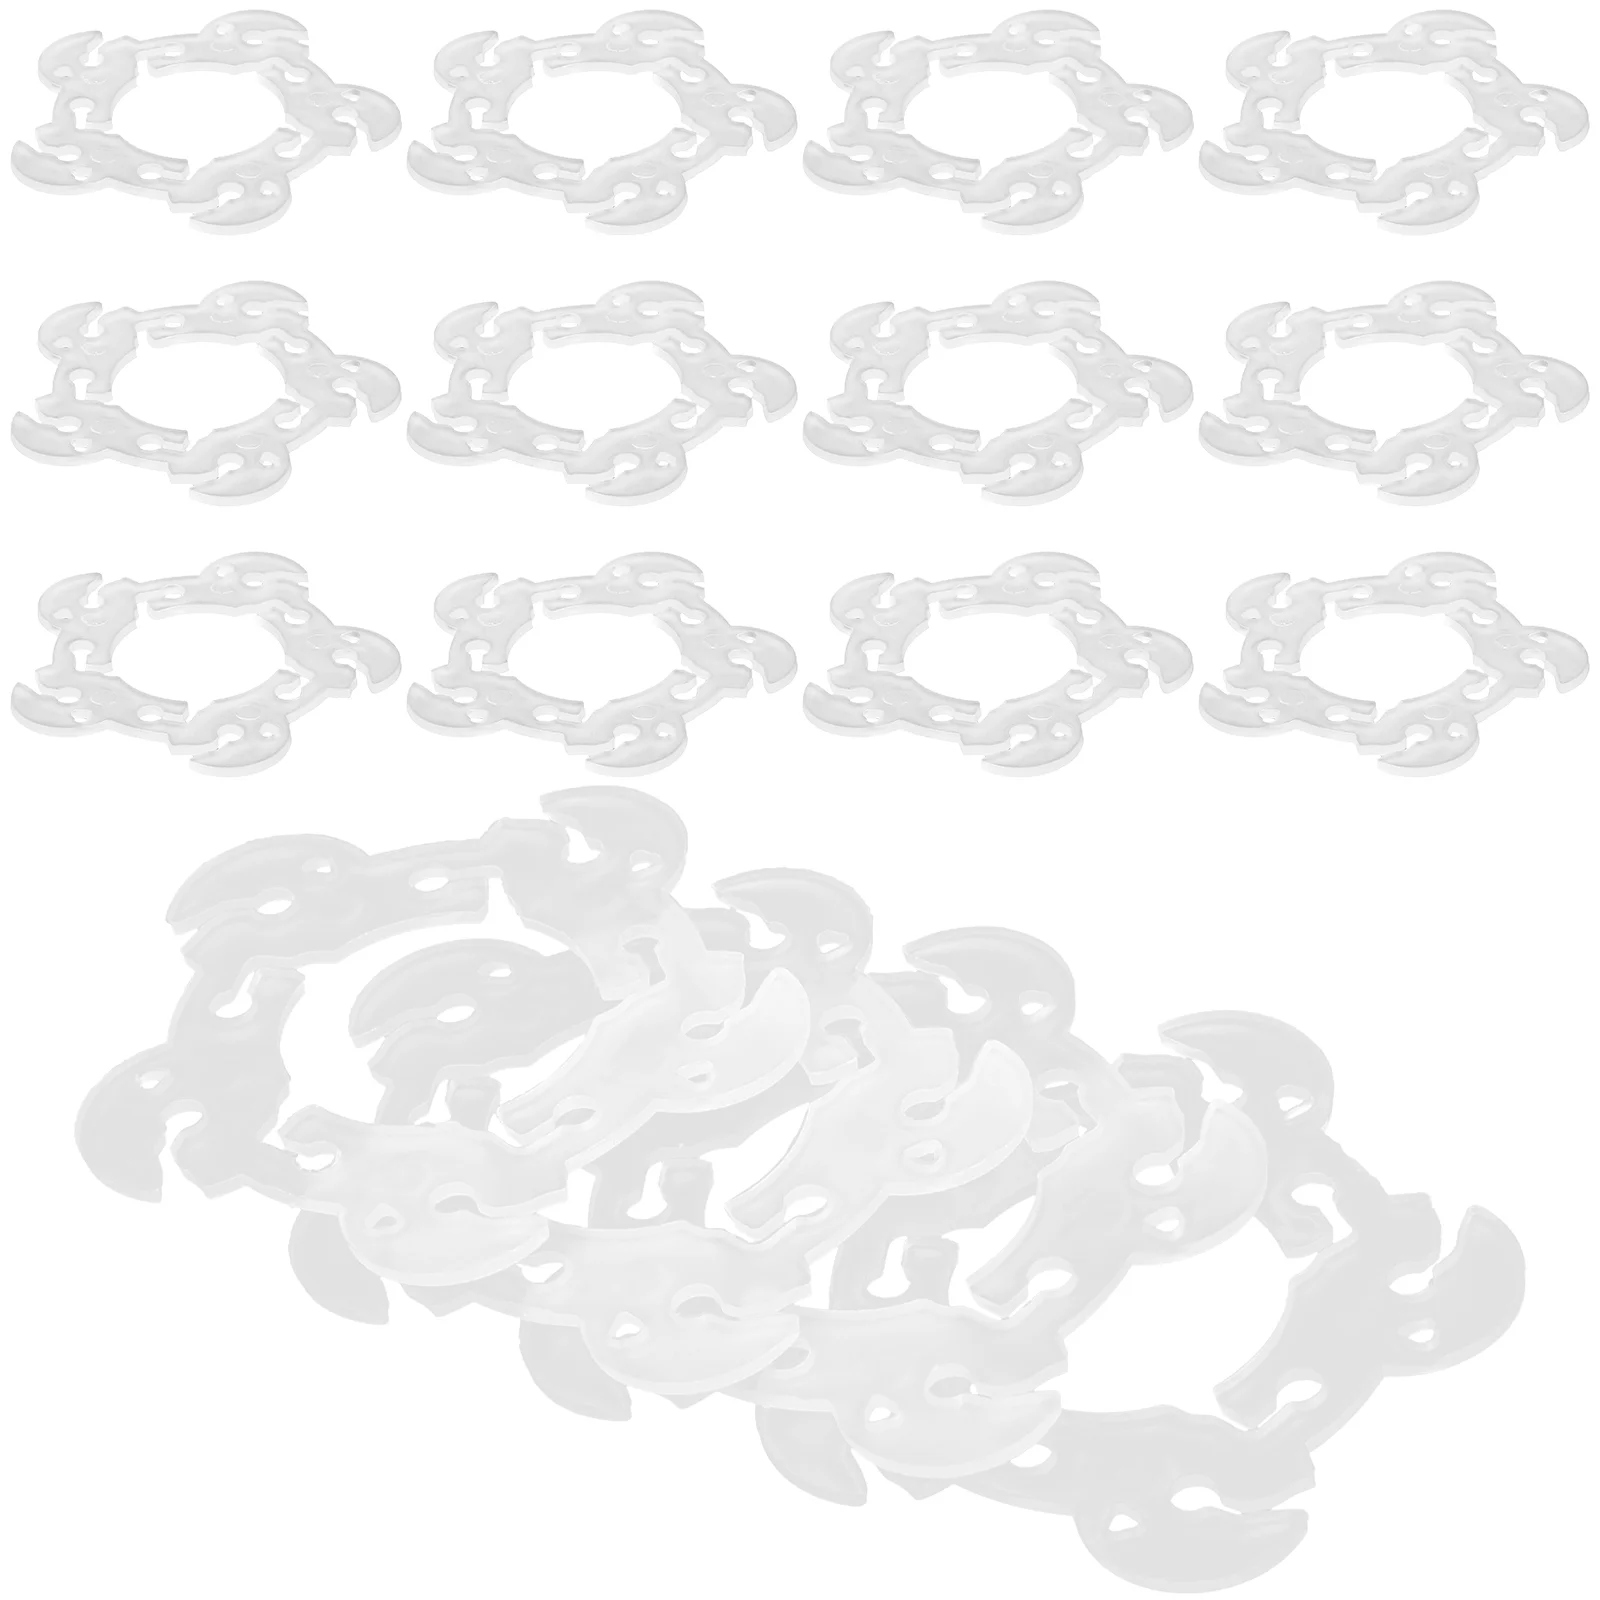 

100 Pcs Balloon Arch Clip Rings Fixing Buckles Balloons Clear Knotter Clips Birthday Plastic Accessories Folders Stand